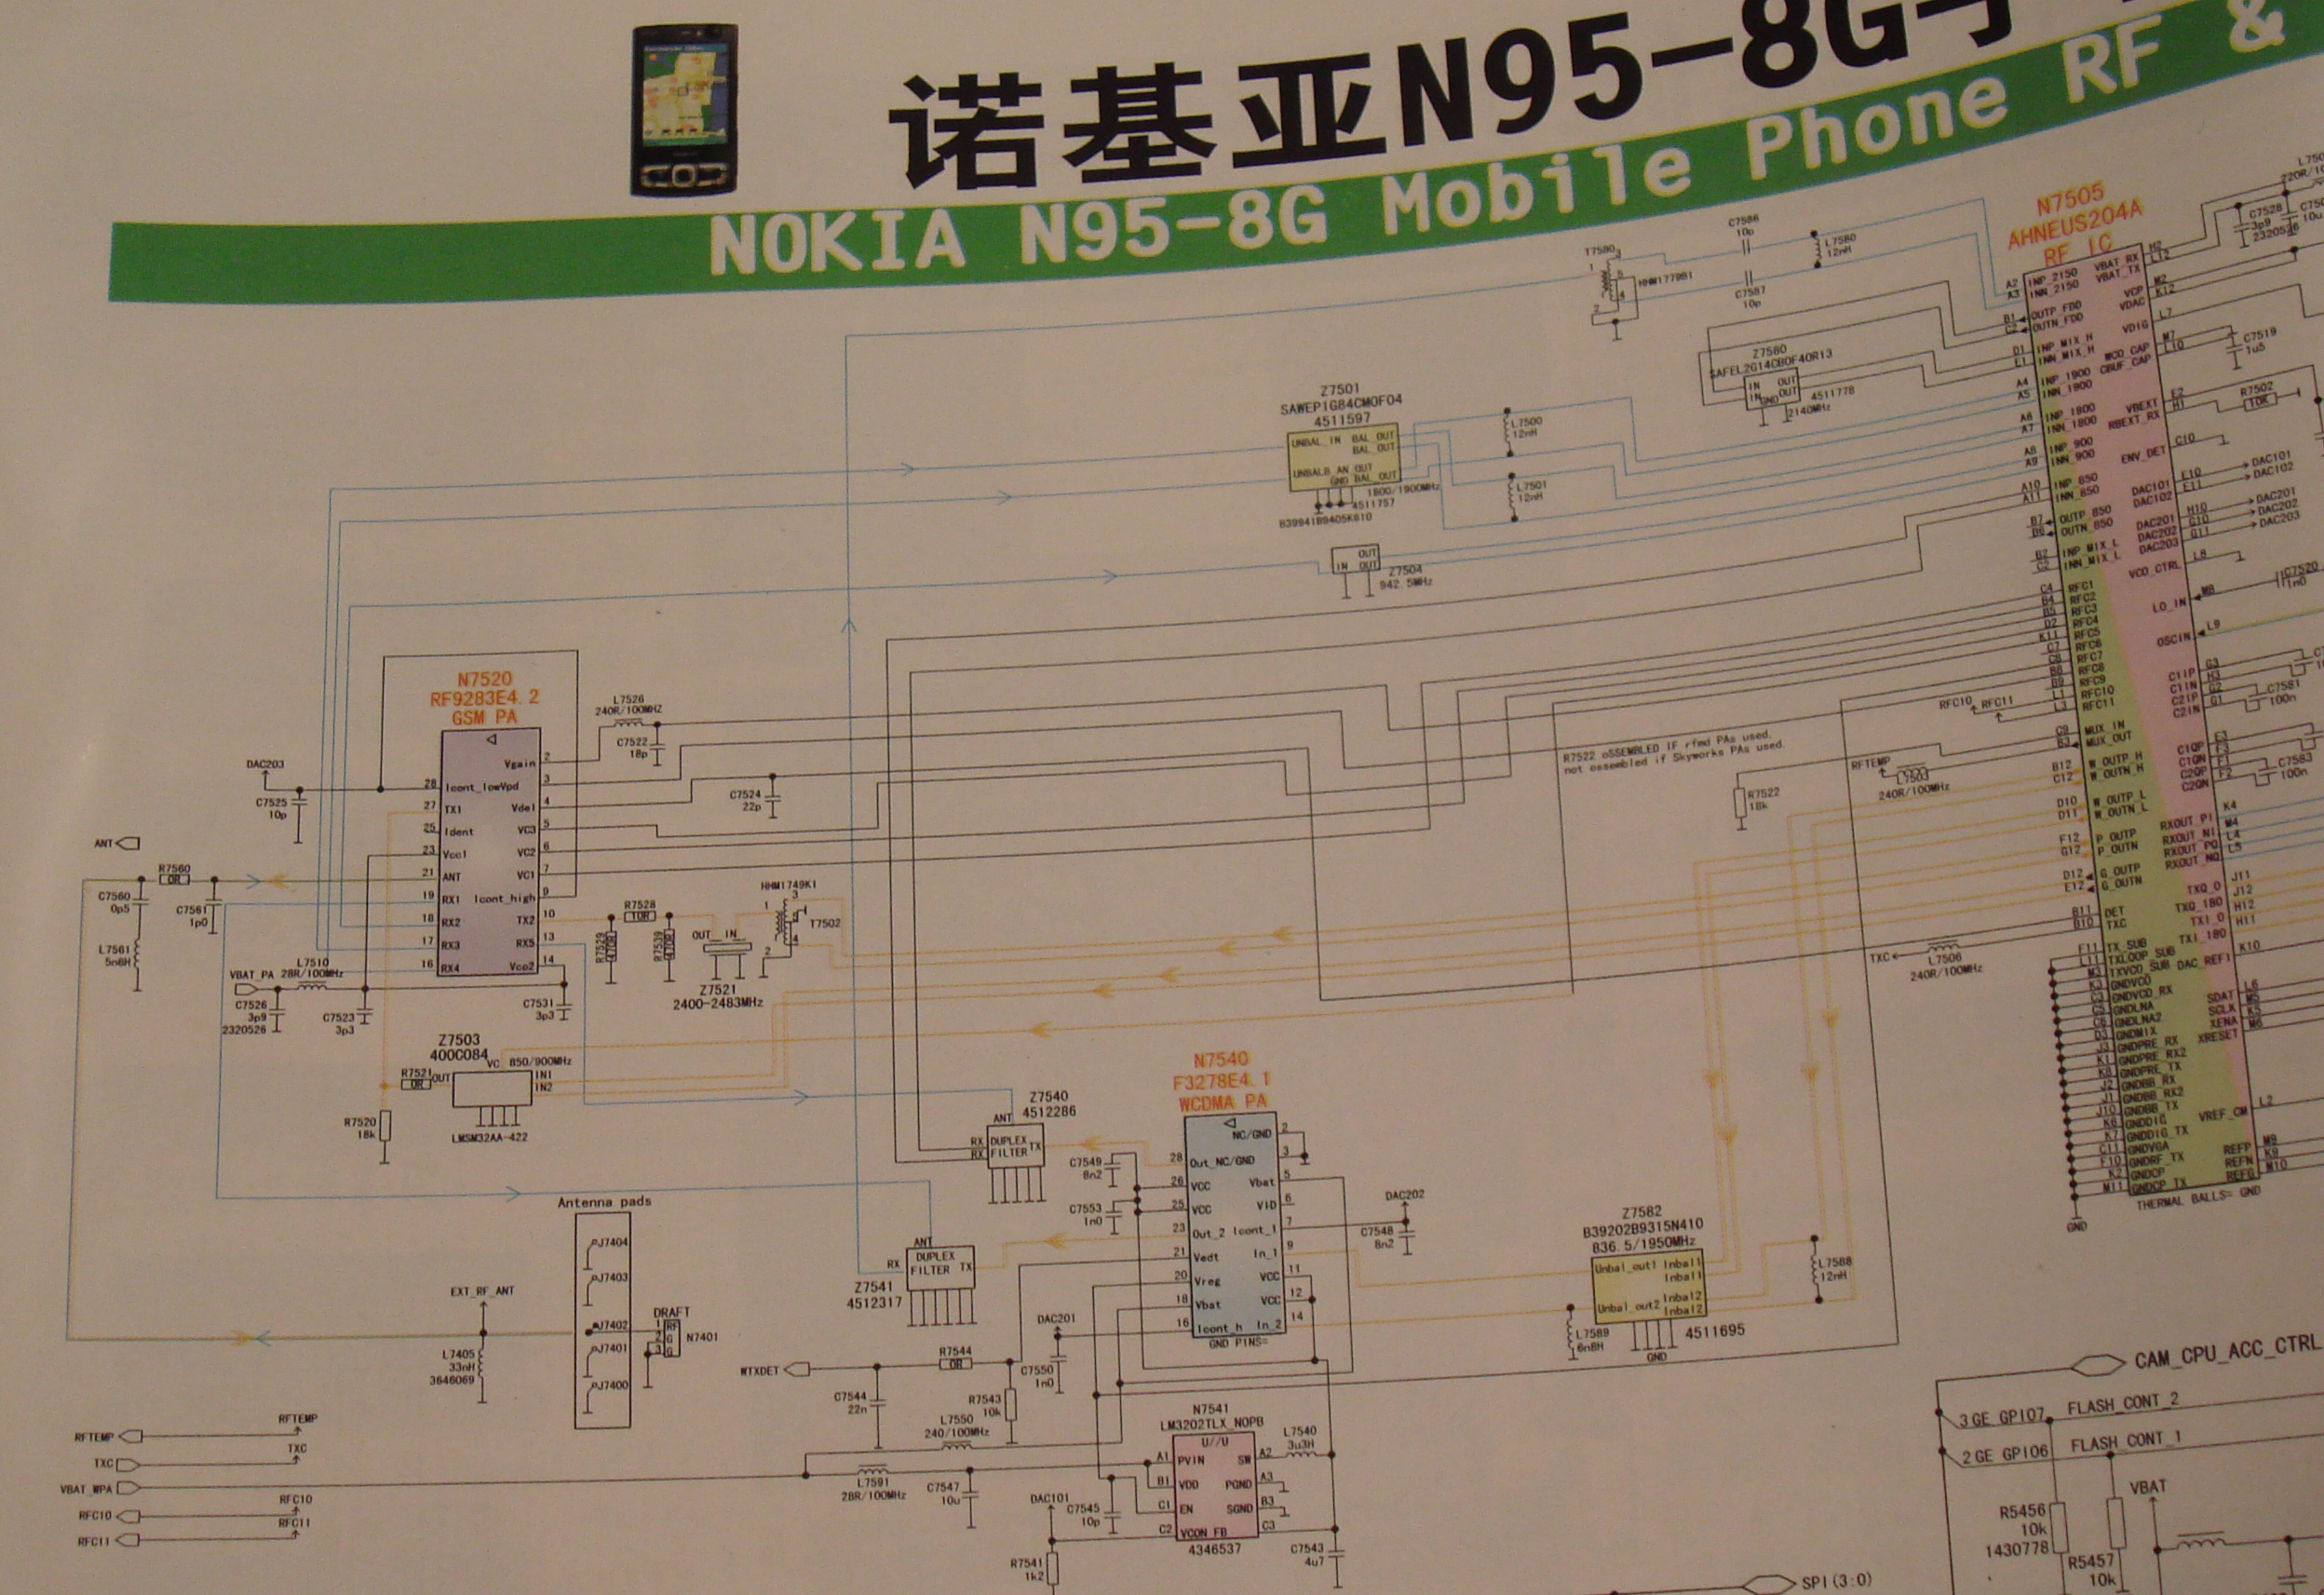 Nokia All Circuit Diagram Book Free - A Detail Of The Schematic For The Nokia N95s Rf Section - Nokia All Circuit Diagram Book Free